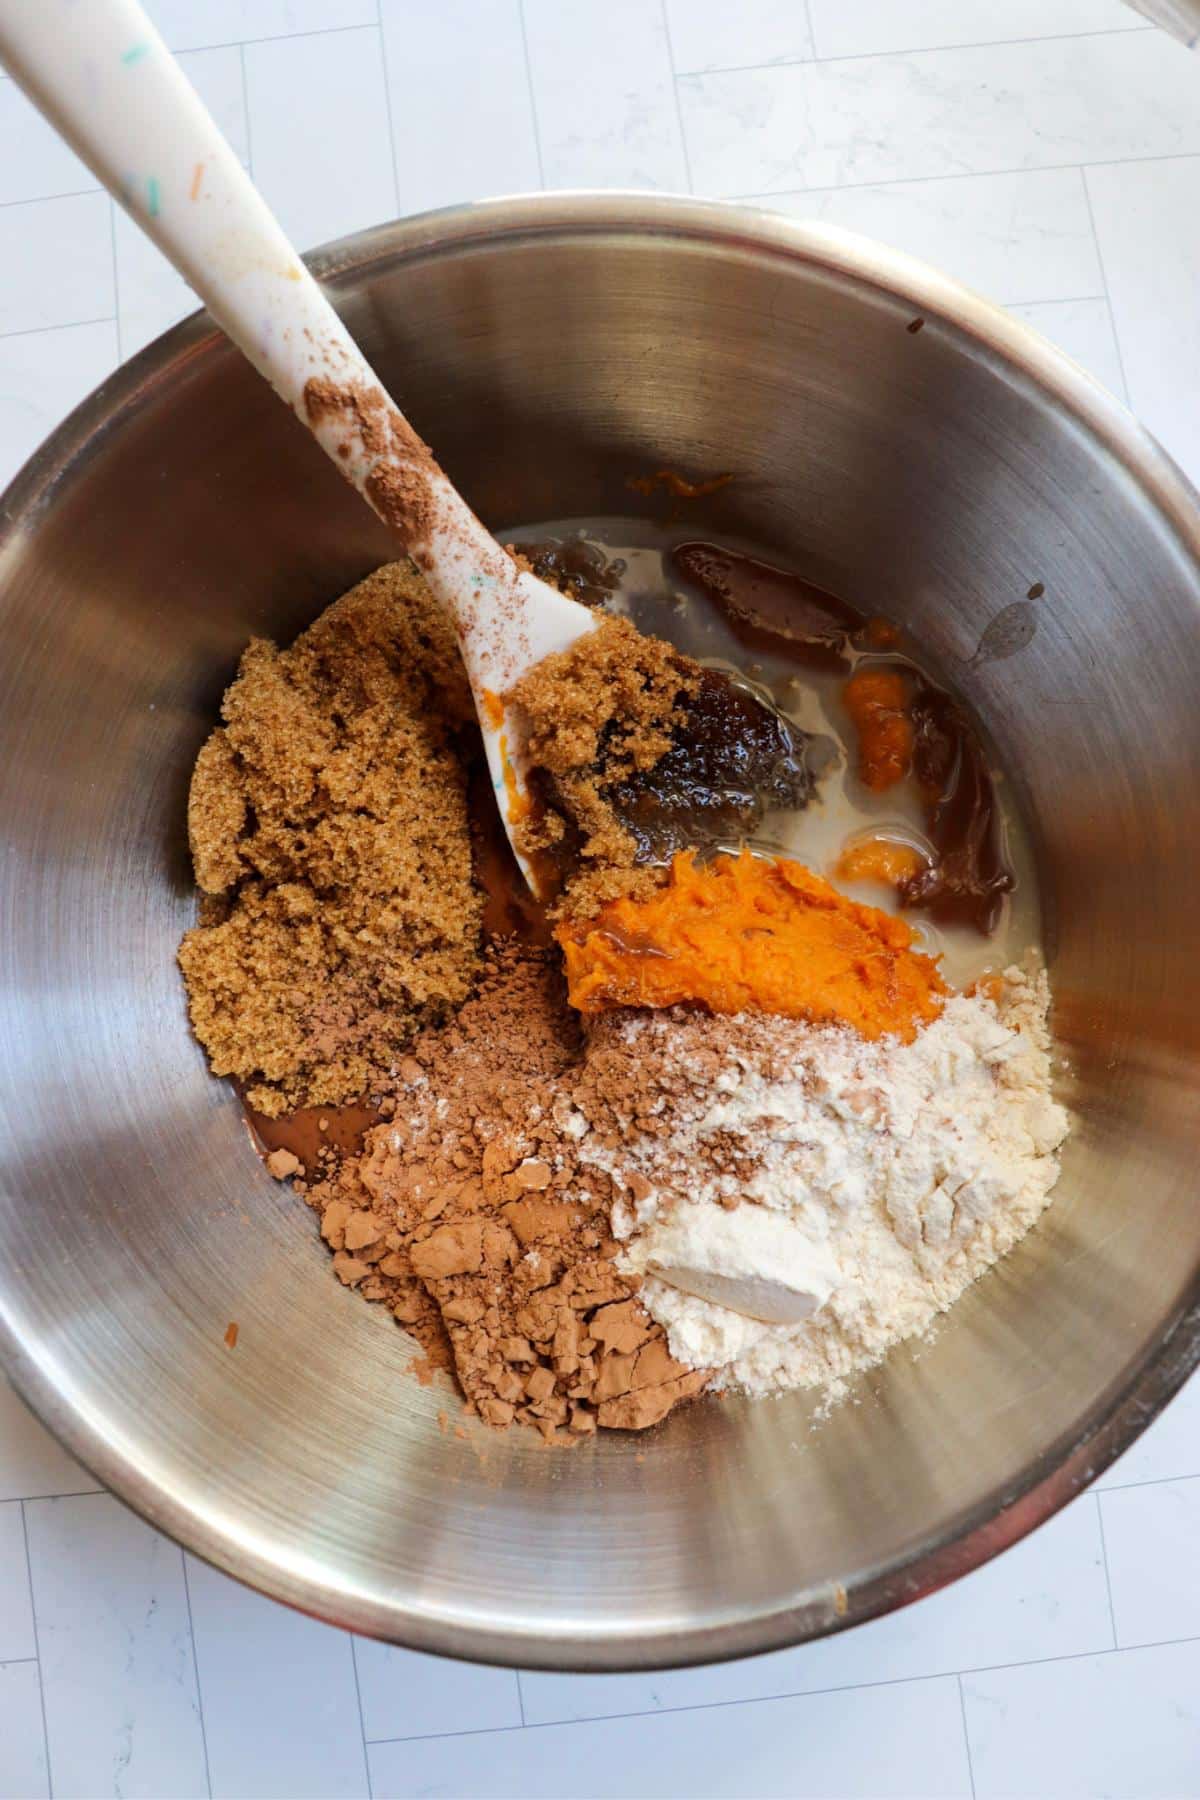 Unmixed sweet potato brownie ingredients in a mixing bowl with a rubber spatula.